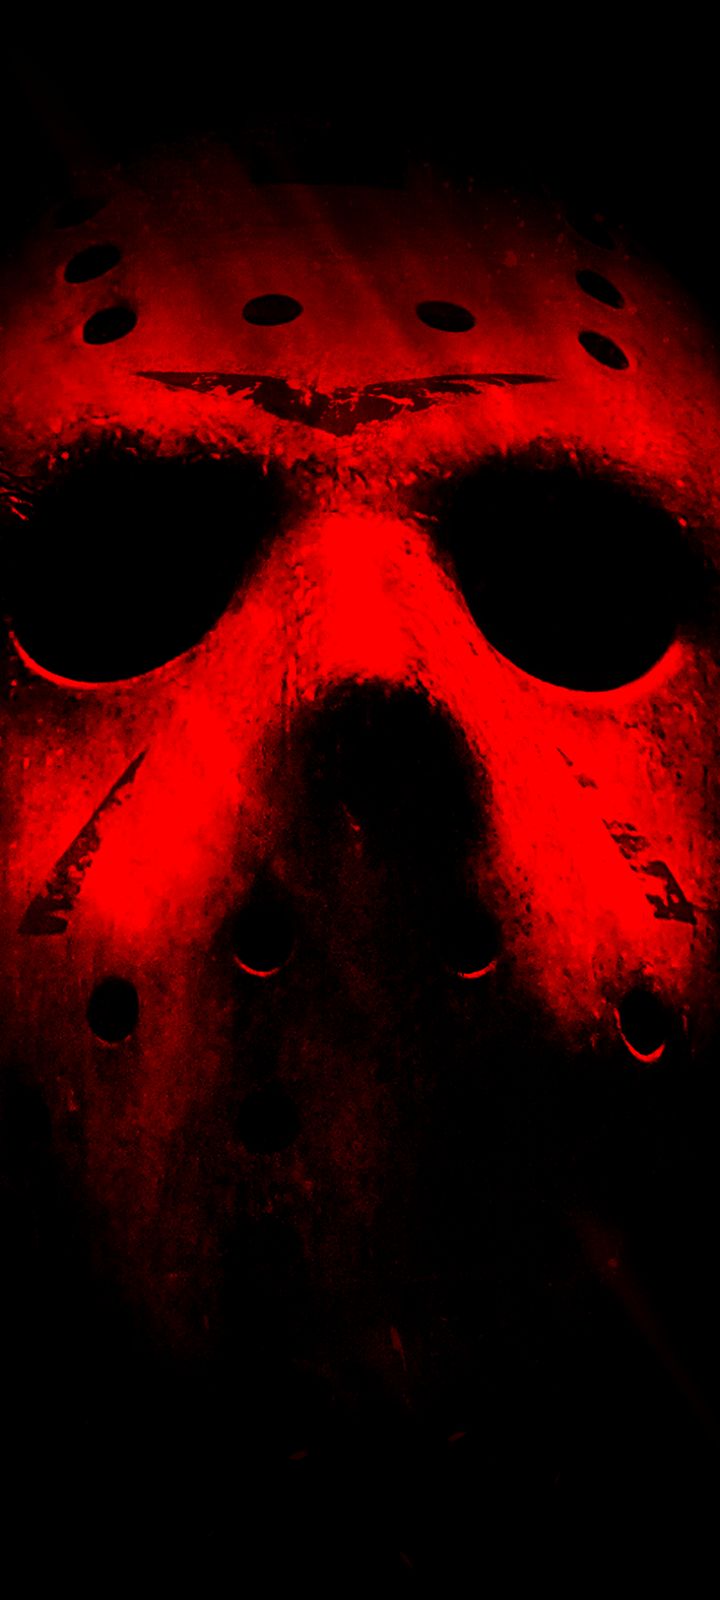 HD wallpaper movie, friday the 13th (2009), jason voorhees, friday the 13th